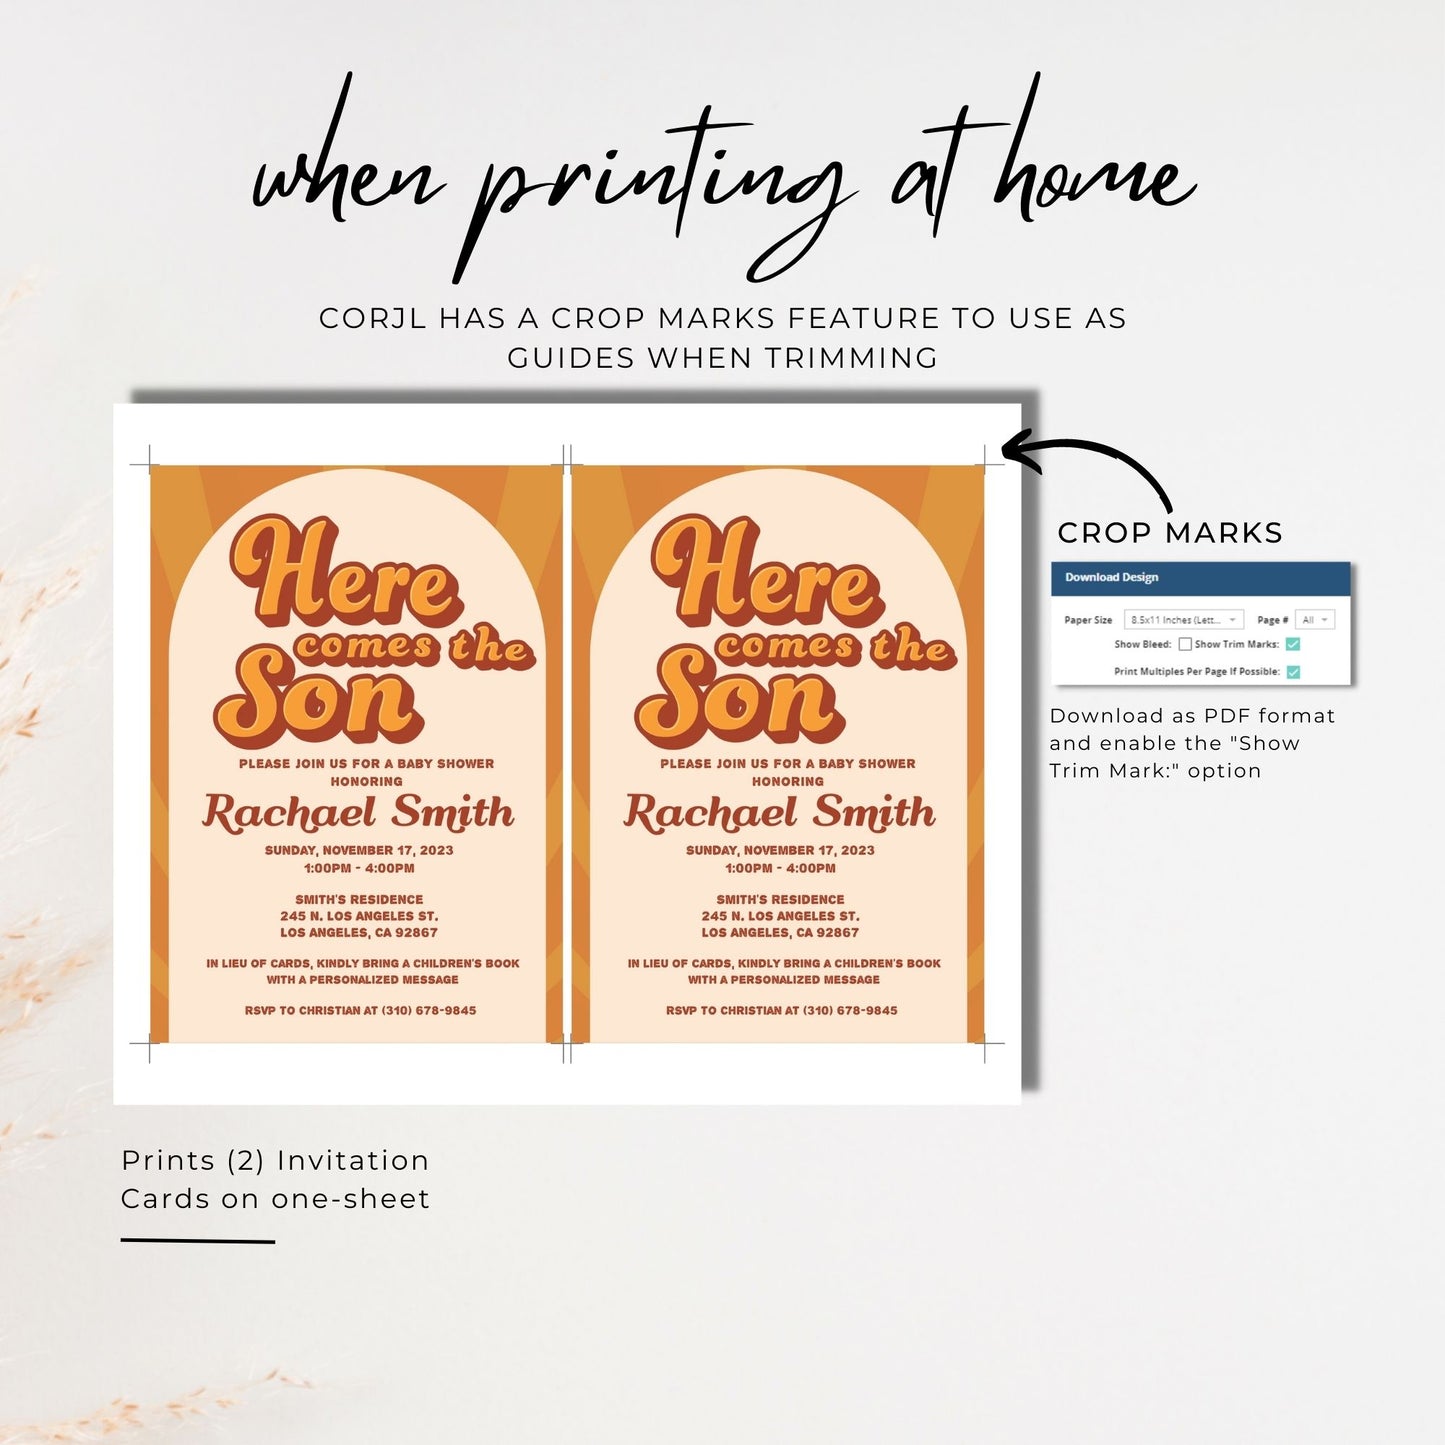 Here Comes the Son Baby Shower Invitation 5x7